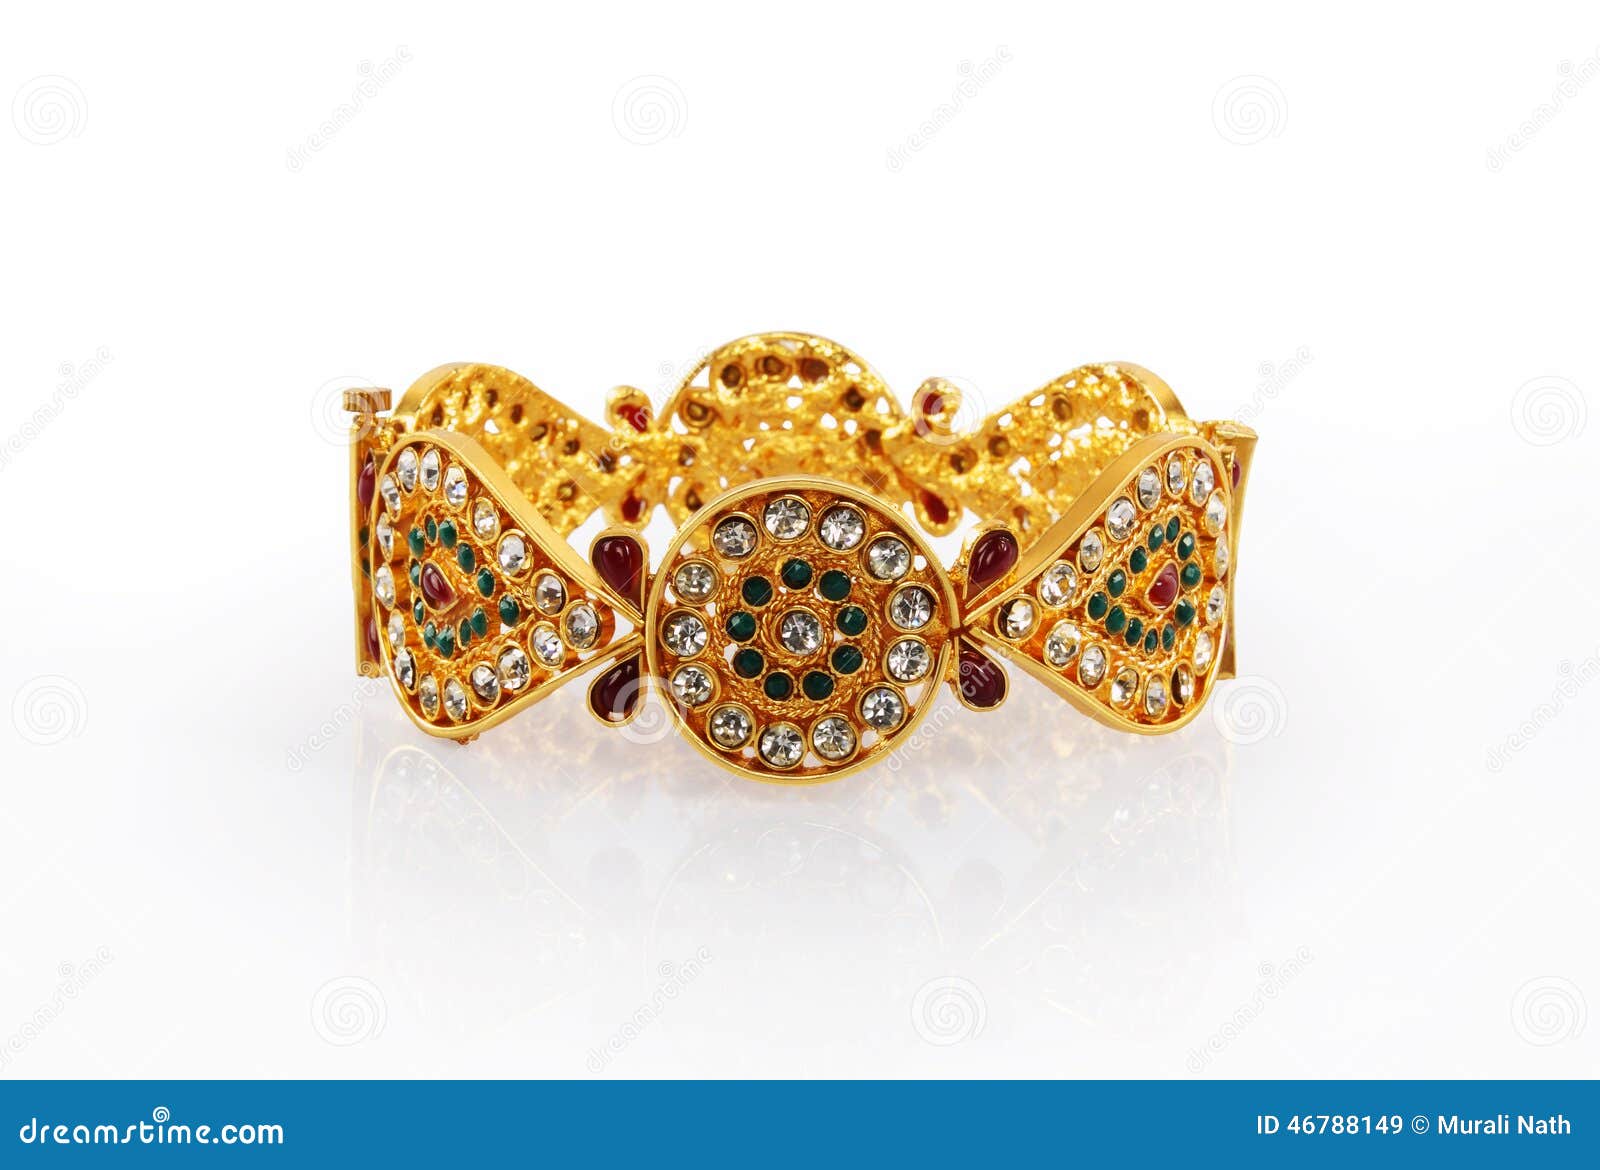 Indian Gold Plated Traditional Beautiful Finger Ring New Women Fashion  Jewelry | eBay